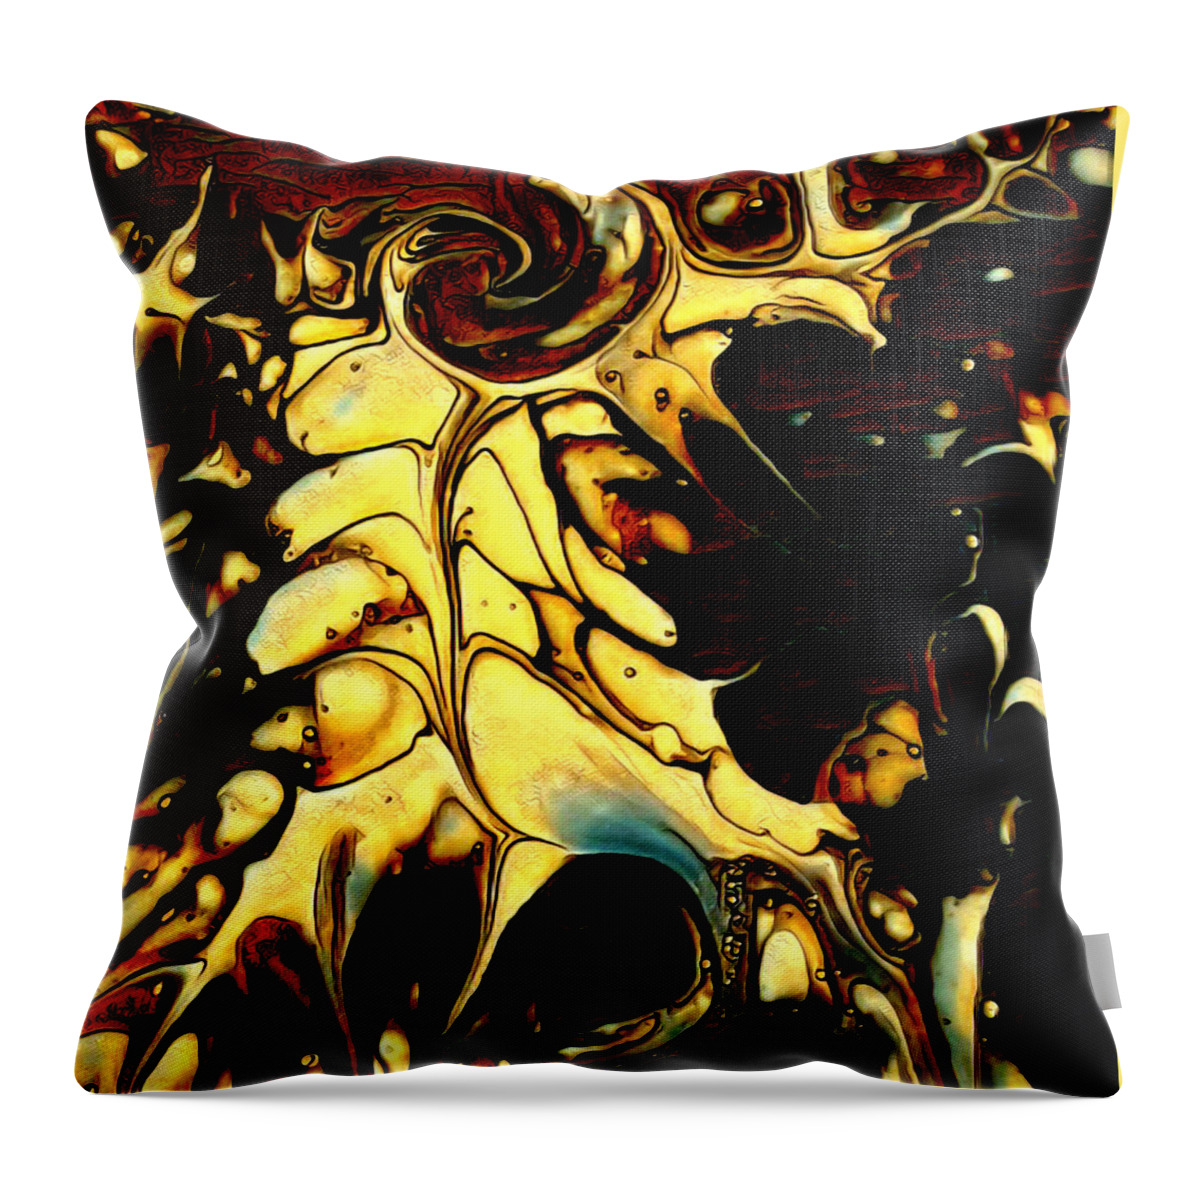 Art Throw Pillow featuring the digital art 2020 Acrylic Pour Digital Alteration 4 by Artful Oasis